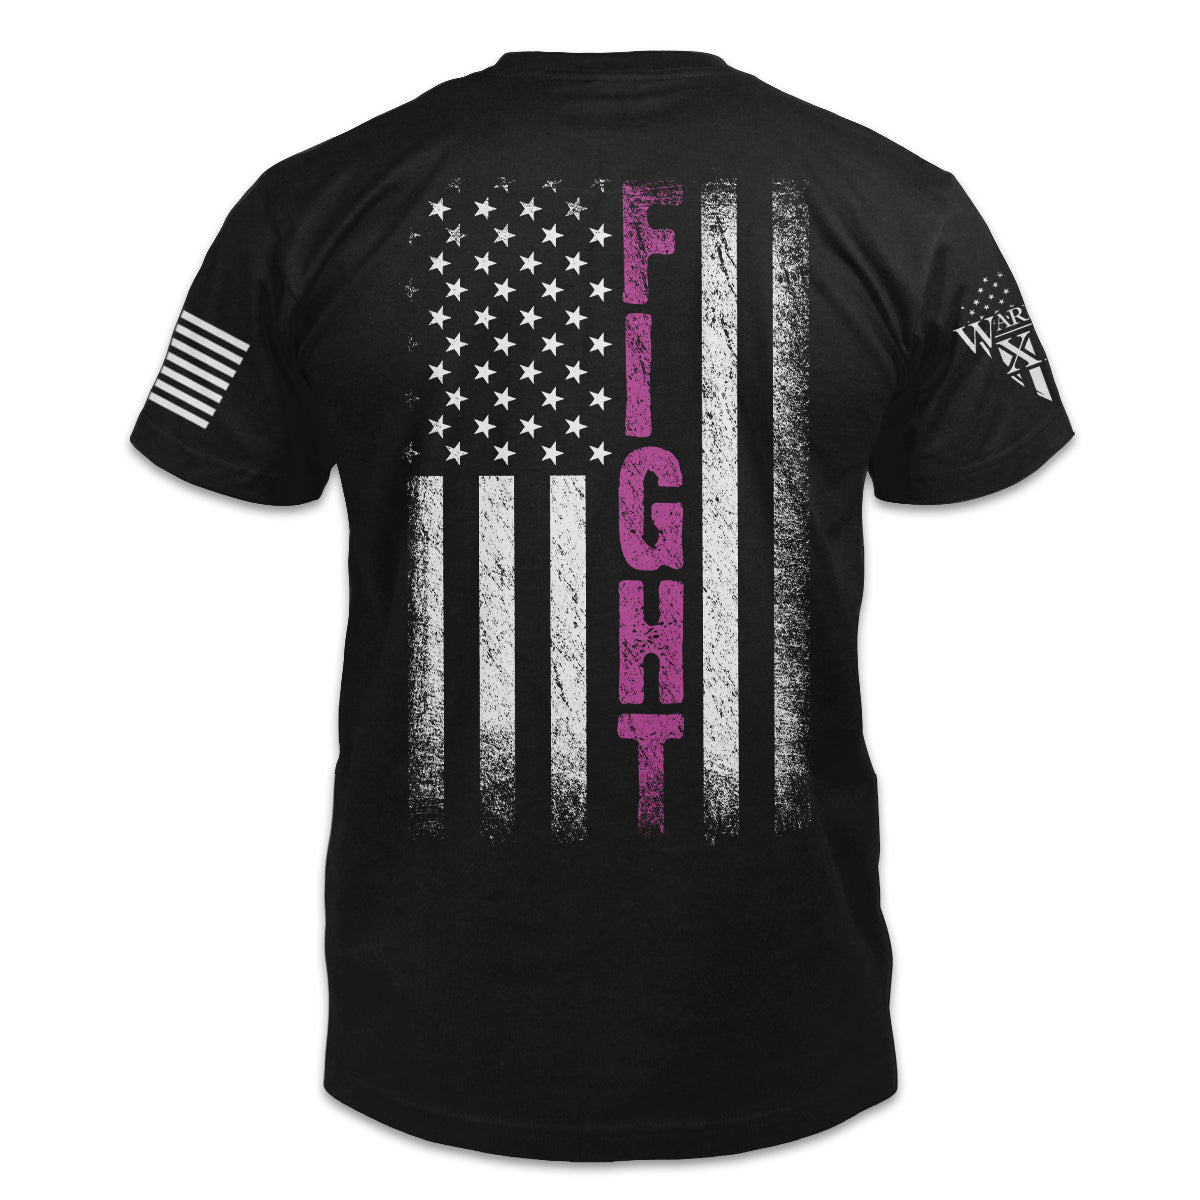 A black t-shirt with the words "Fight" within an American flag printed on the back of the shirt for breast cancer awareness.